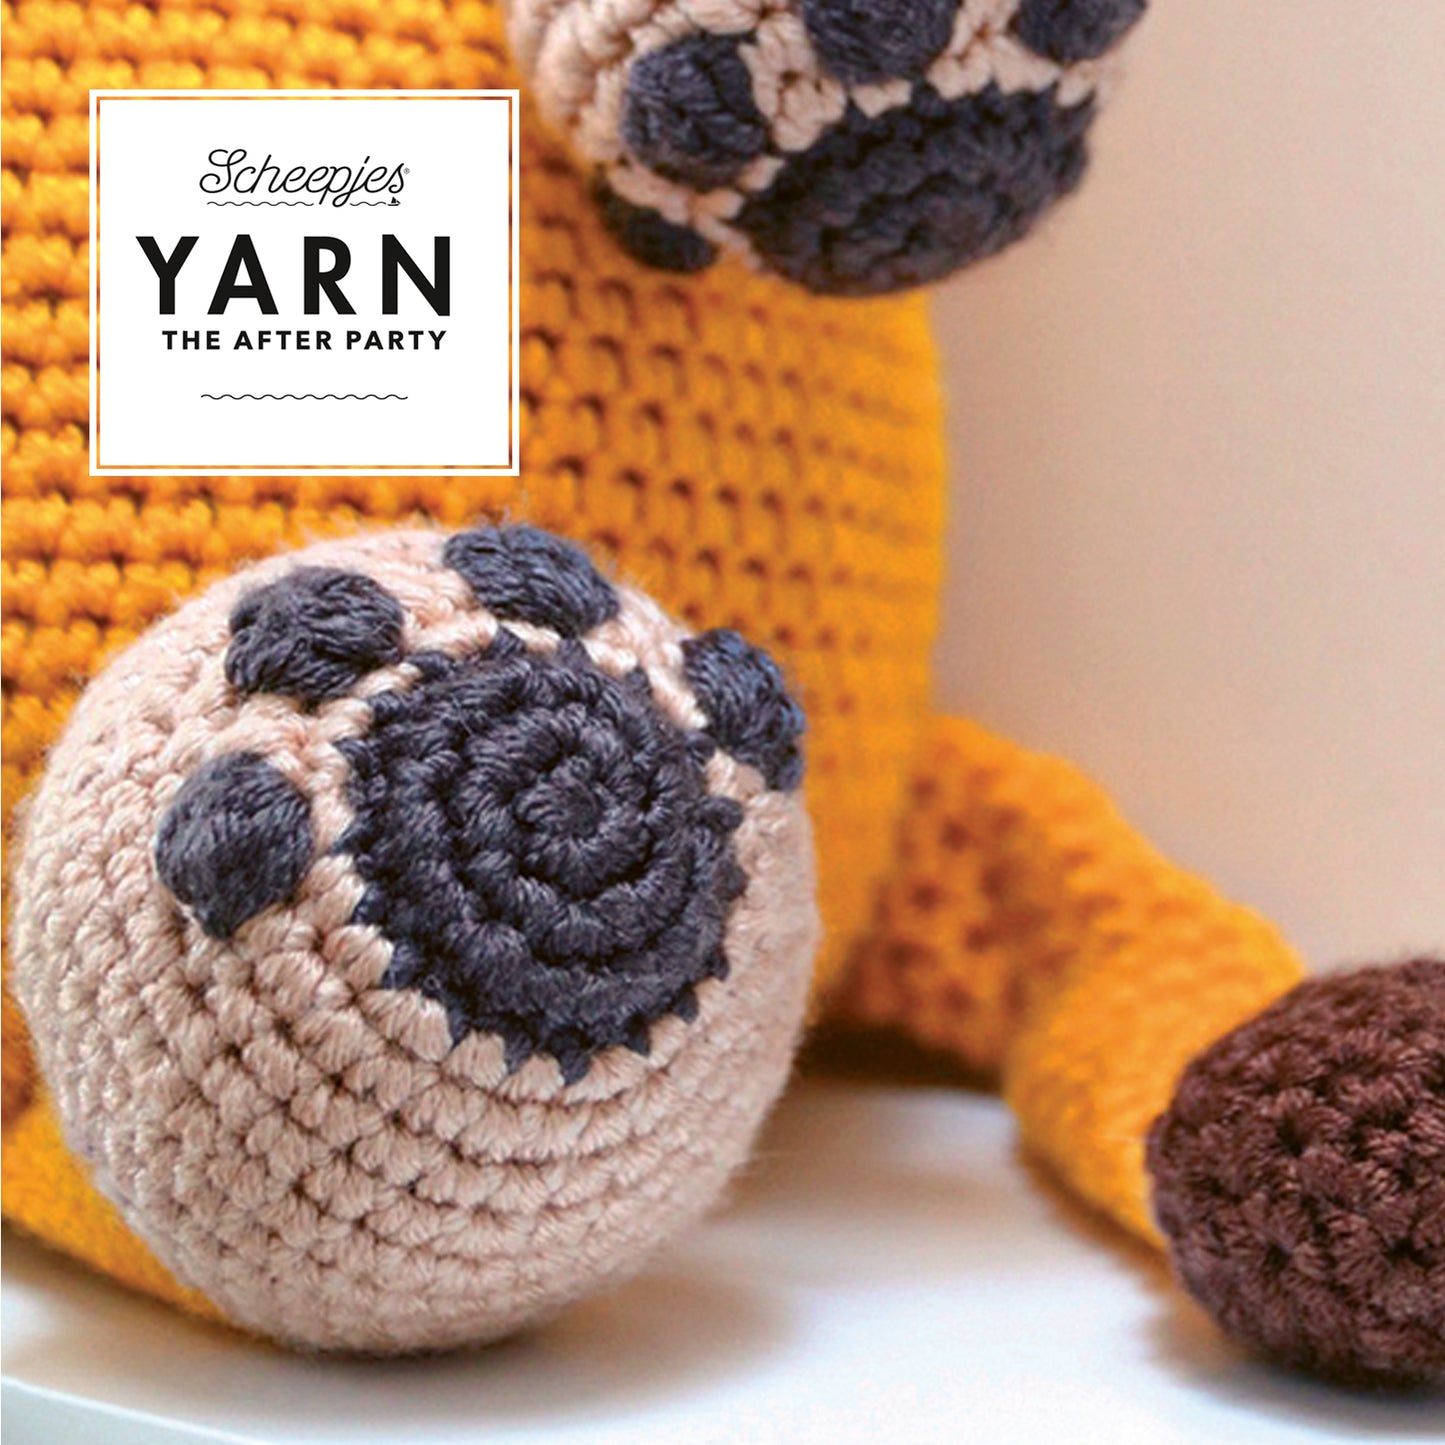 Scheepjes Yarn The After Party no. 131 - Leroy The Lion (booklet) - (Crochet)